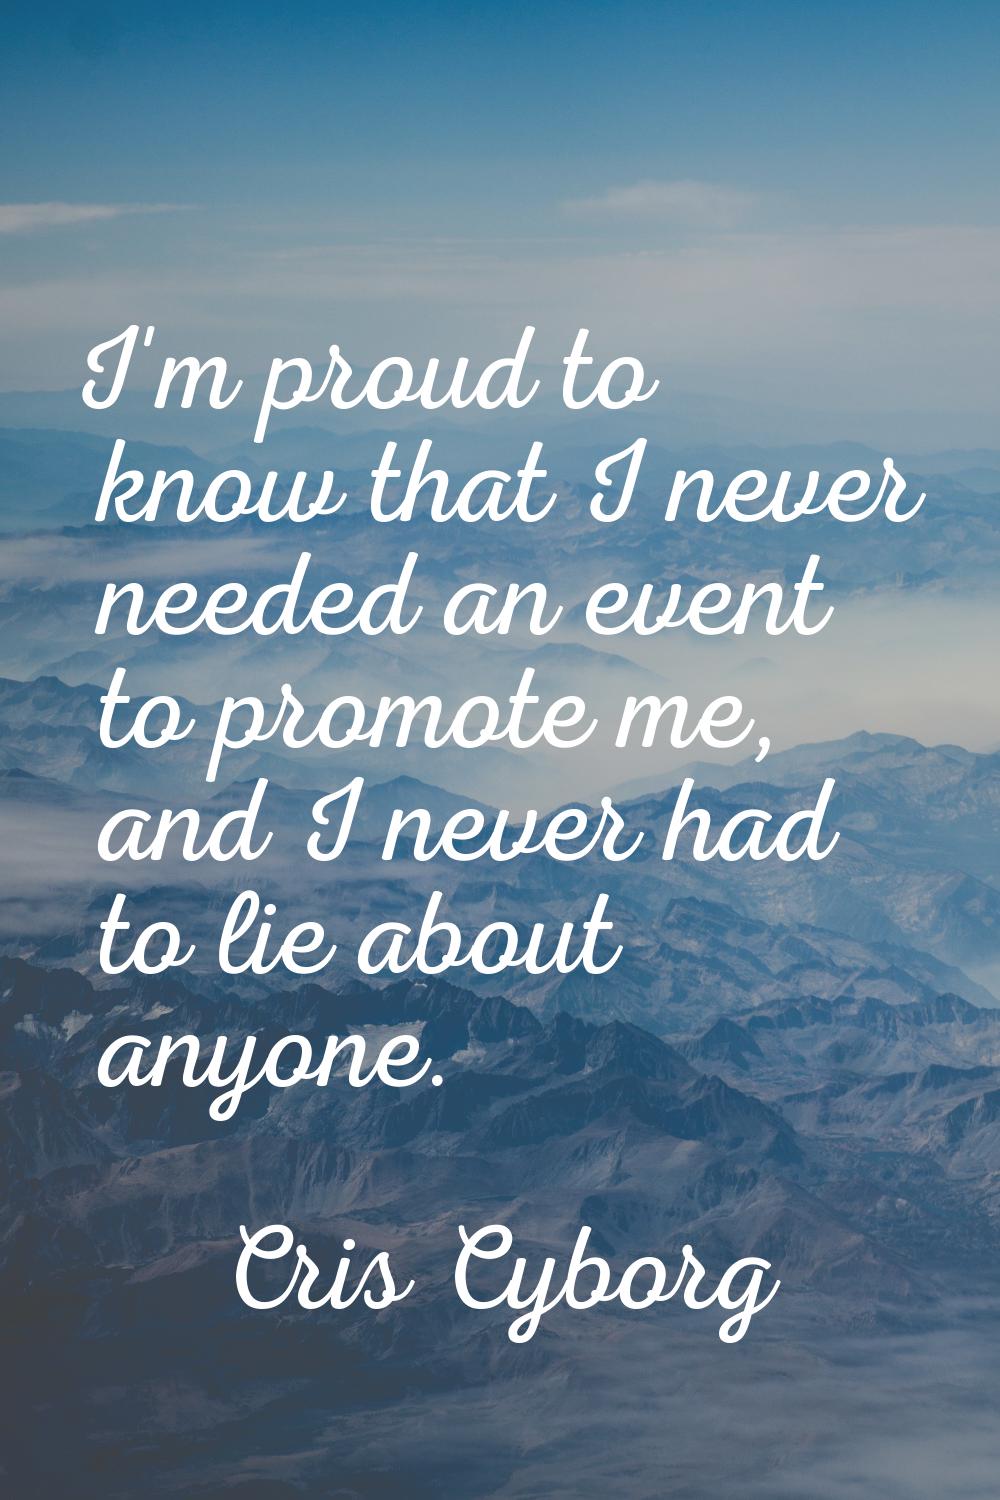 I'm proud to know that I never needed an event to promote me, and I never had to lie about anyone.